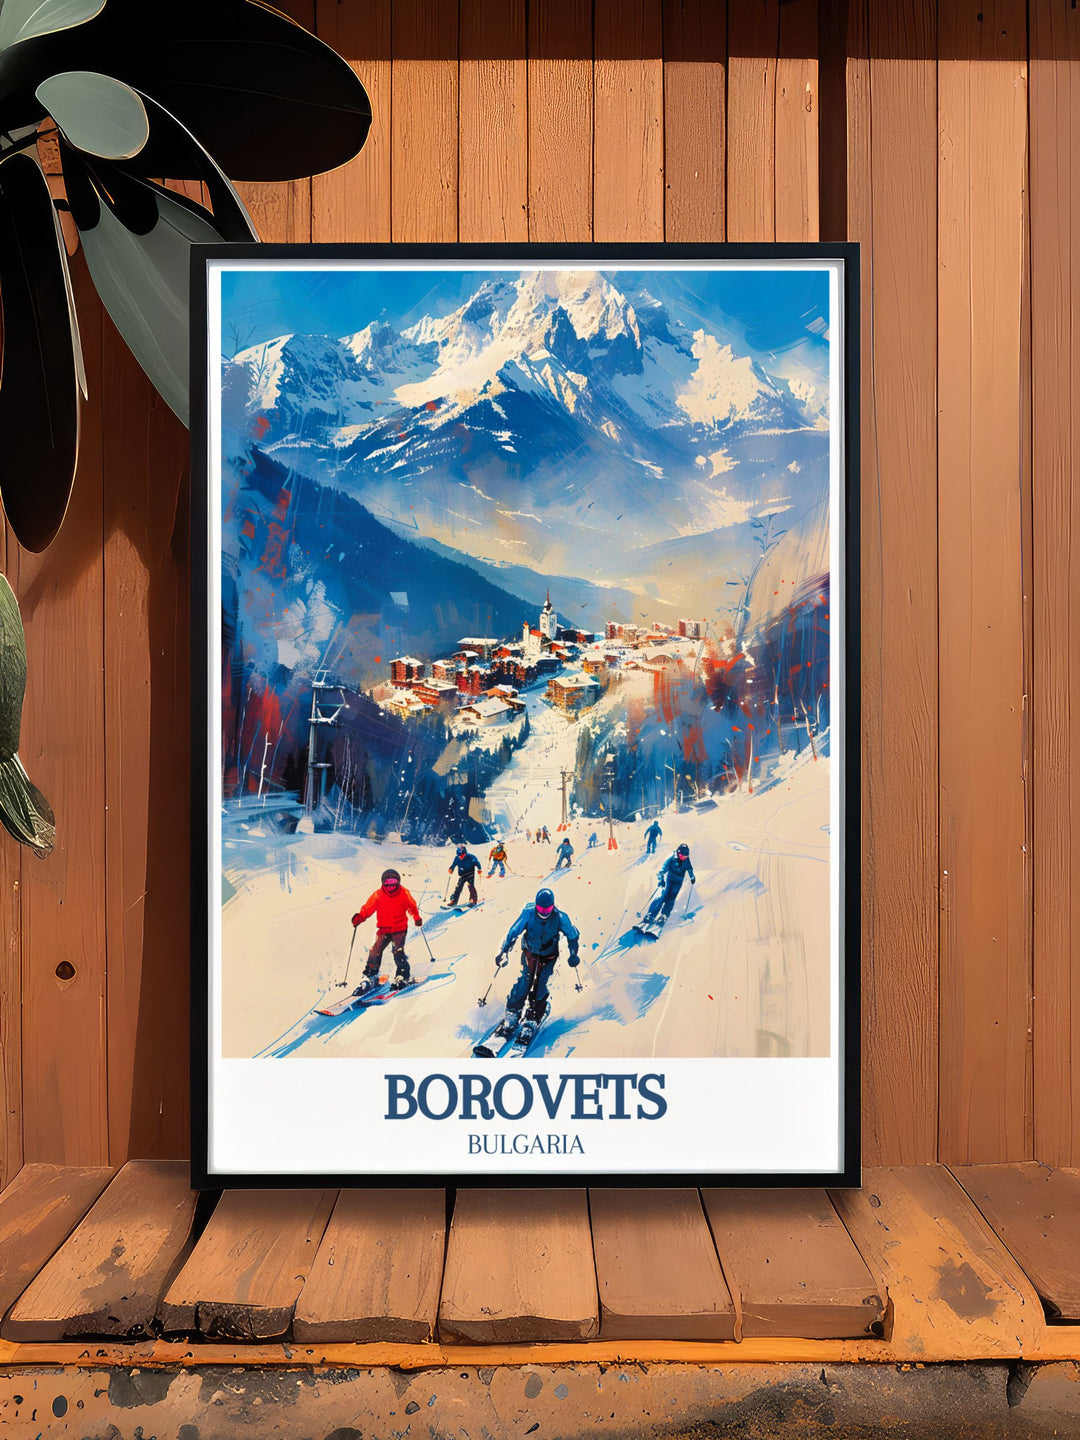 Captivating Borovets travel poster featuring the alpine resort and the majestic Musala Peak, perfect for adding Bulgarias natural charm and skiing culture to your decor.